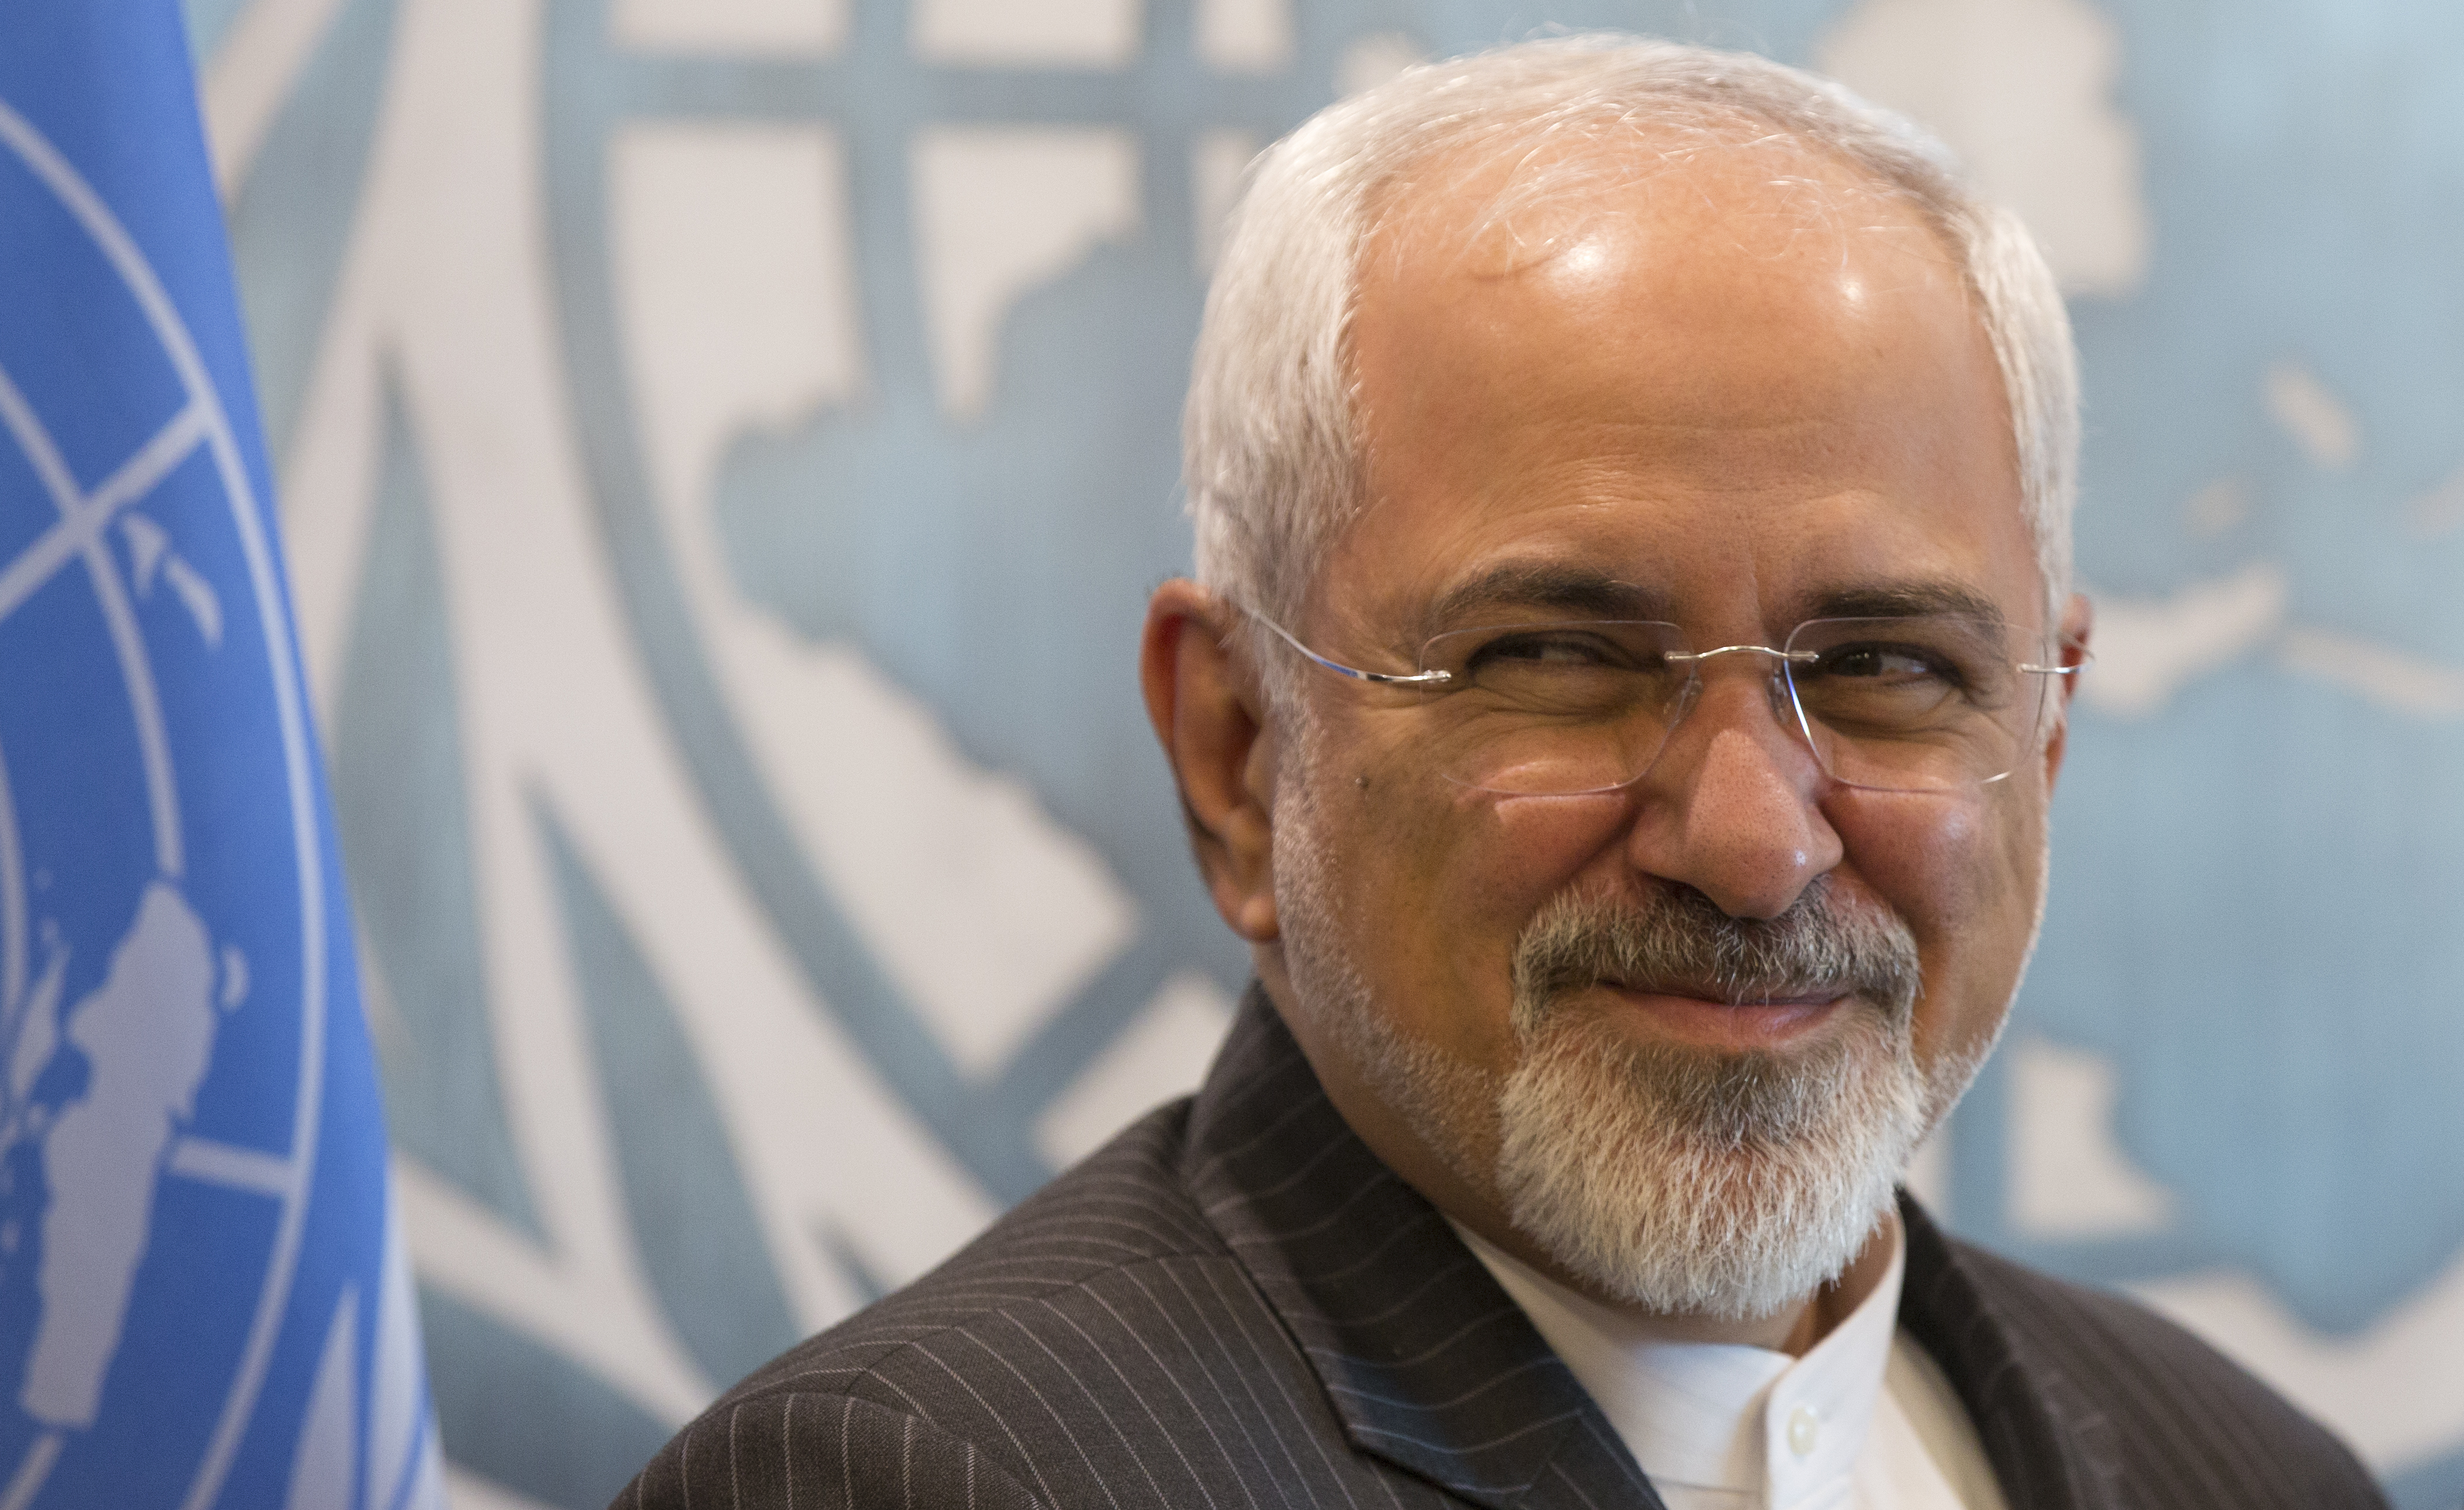 Mohammad Javad Zarif, Minister for Foreign Affairs of the Islamic Republic of Iran  at the United Nations Headquarters in New York City. (LightRocket via Getty Images)